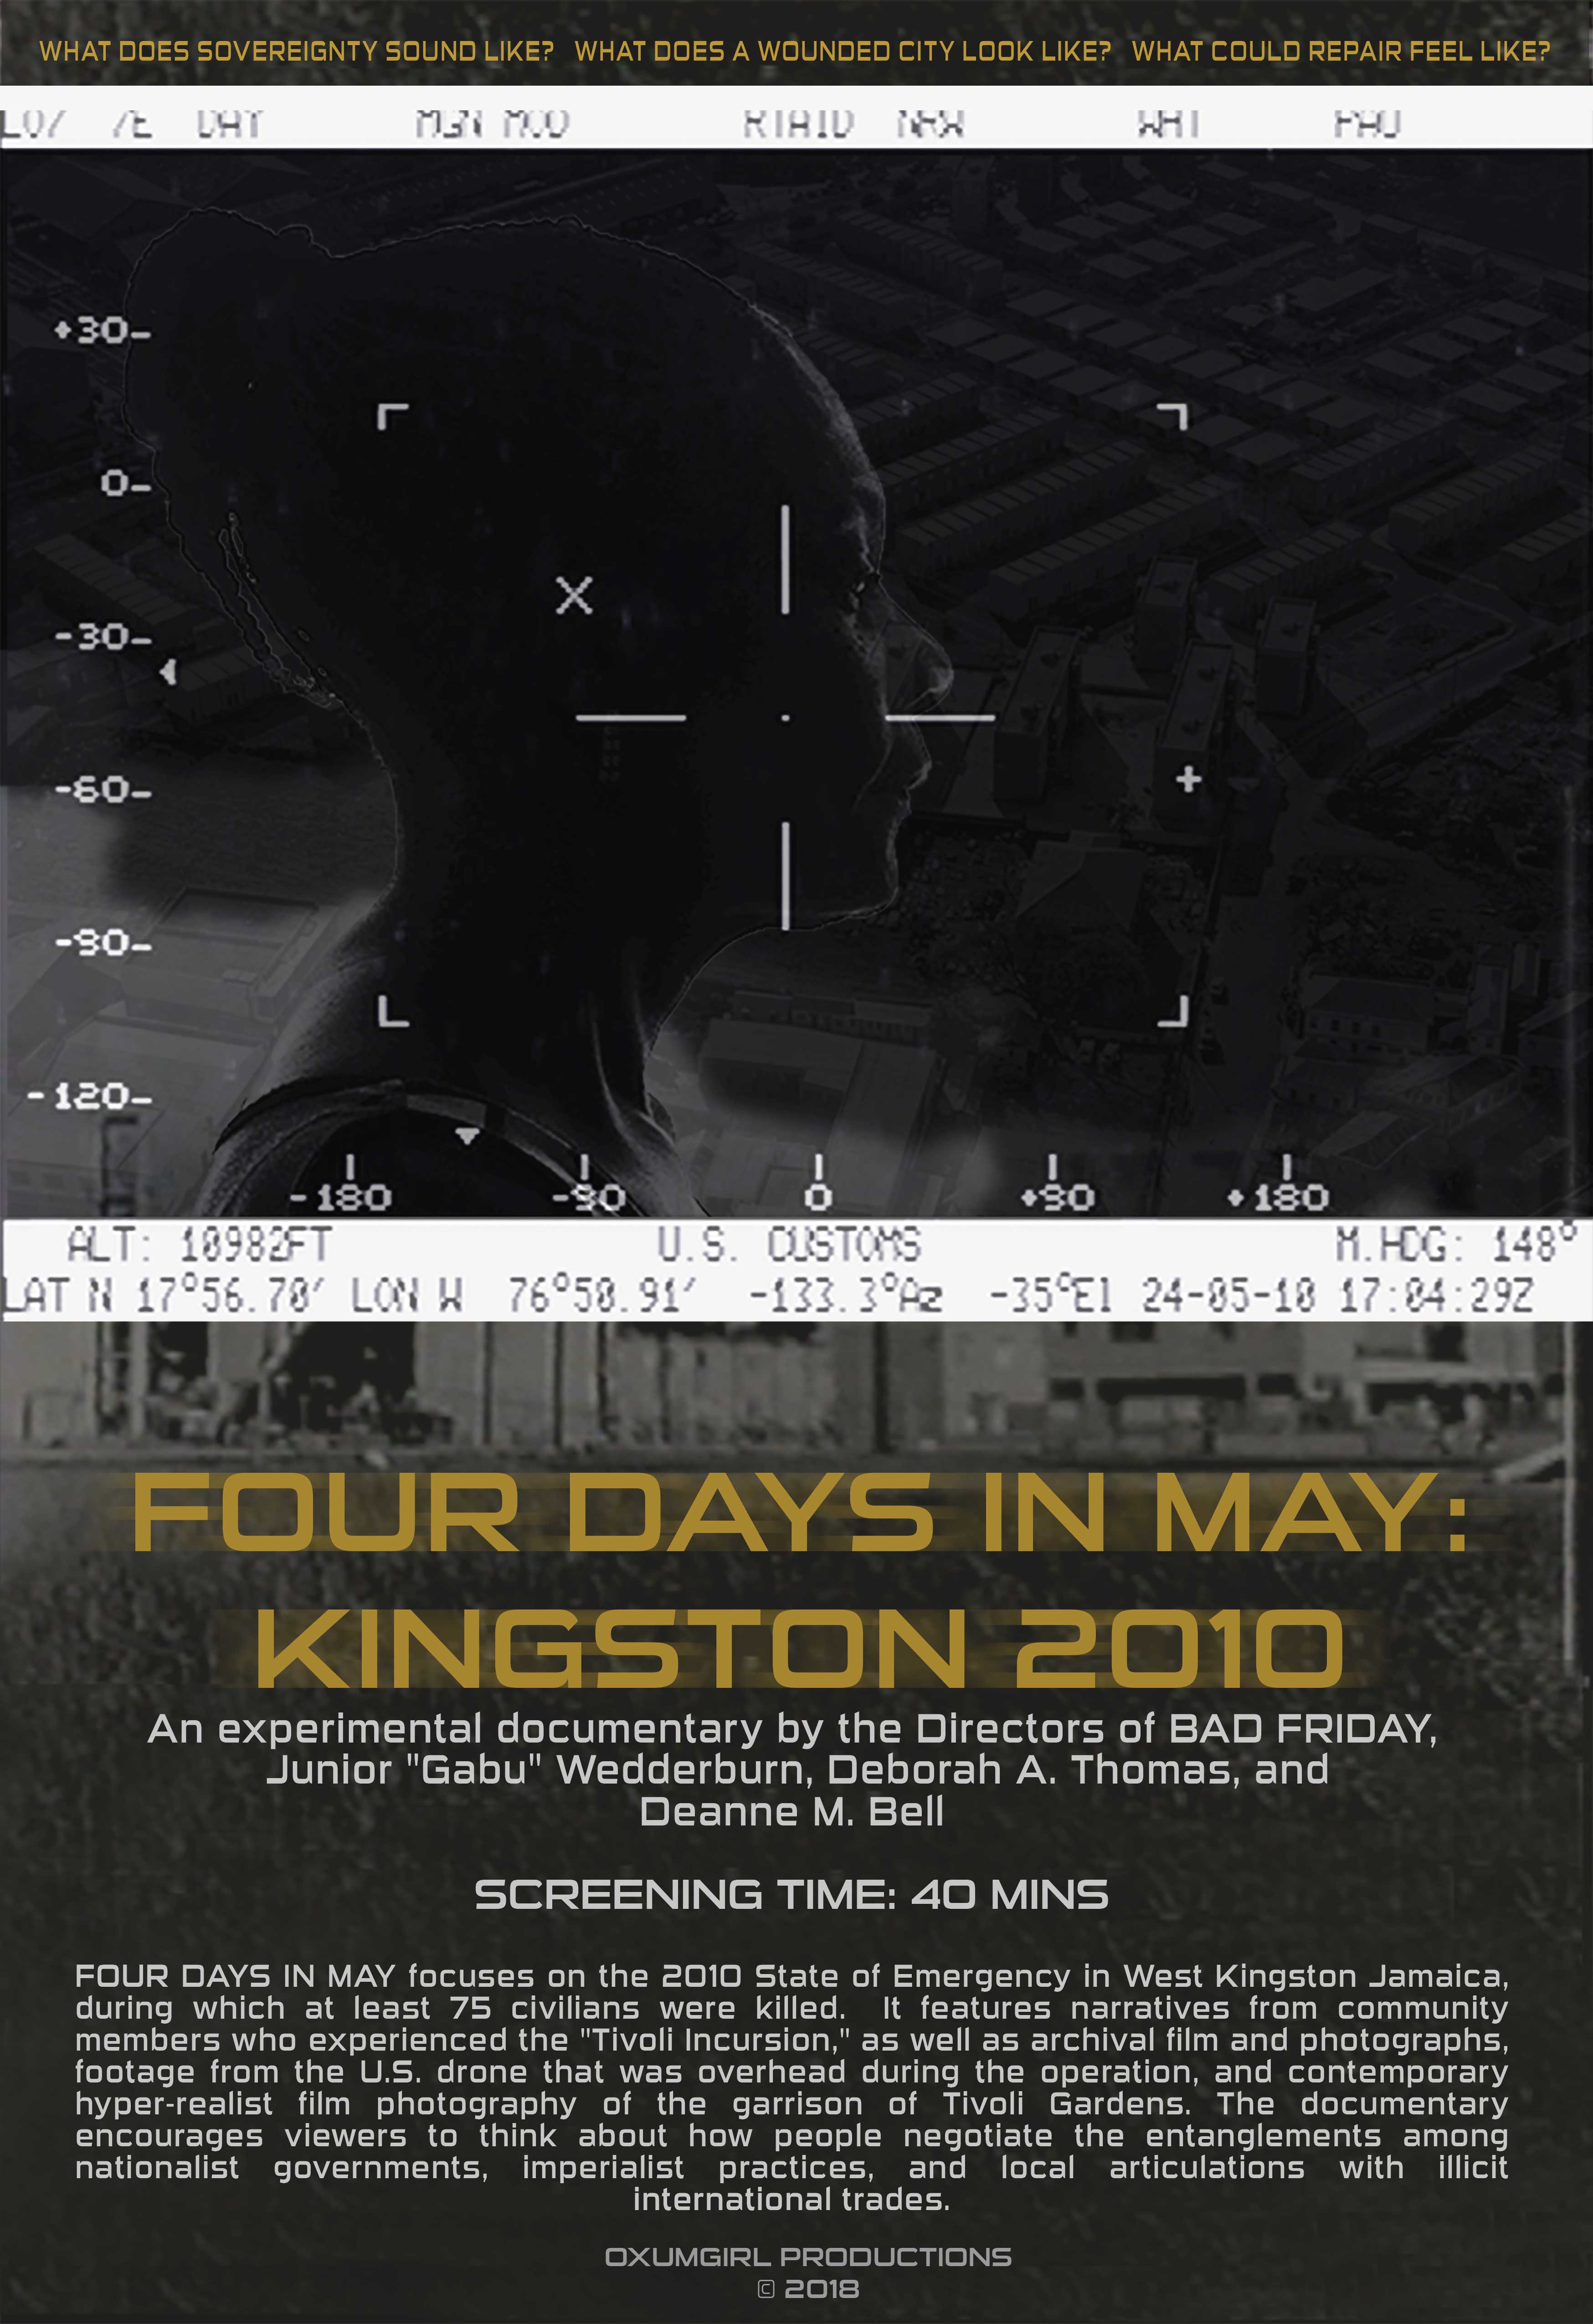 Four Days in May: Kingston 2010